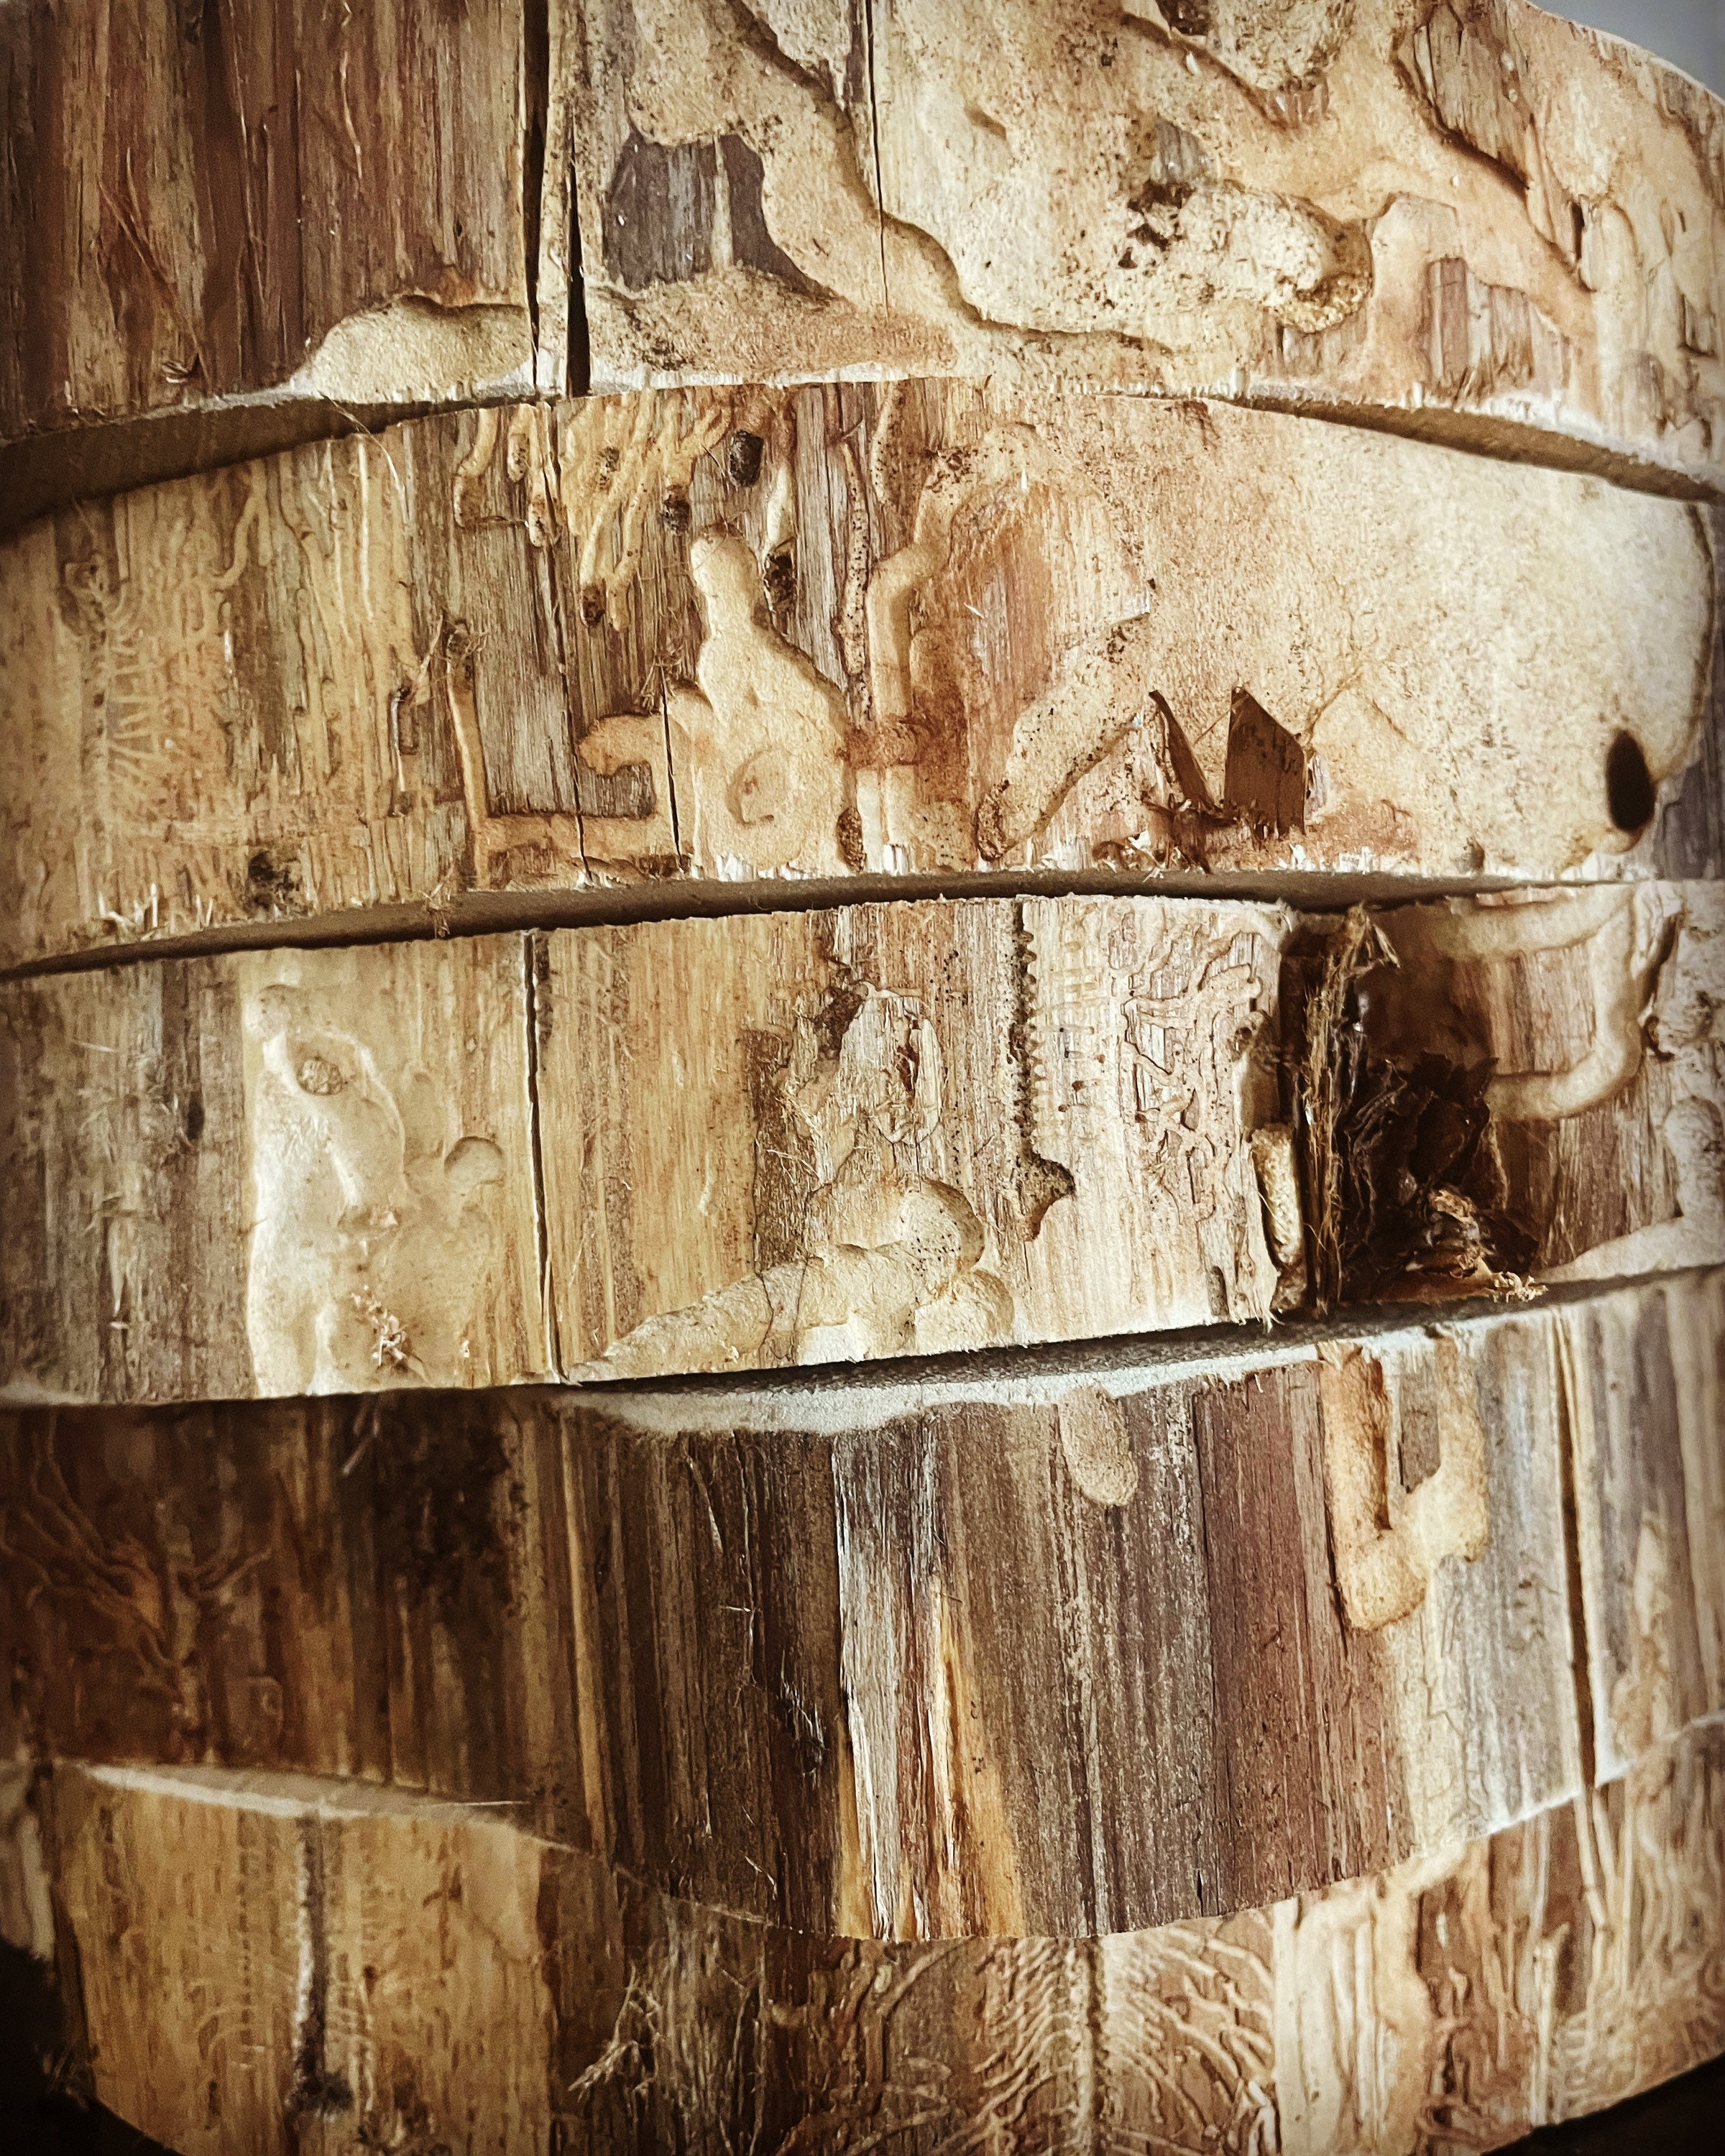 Aromatic Eastern Cedar Rounds Wood Slices for Centerpieces and so Much More  